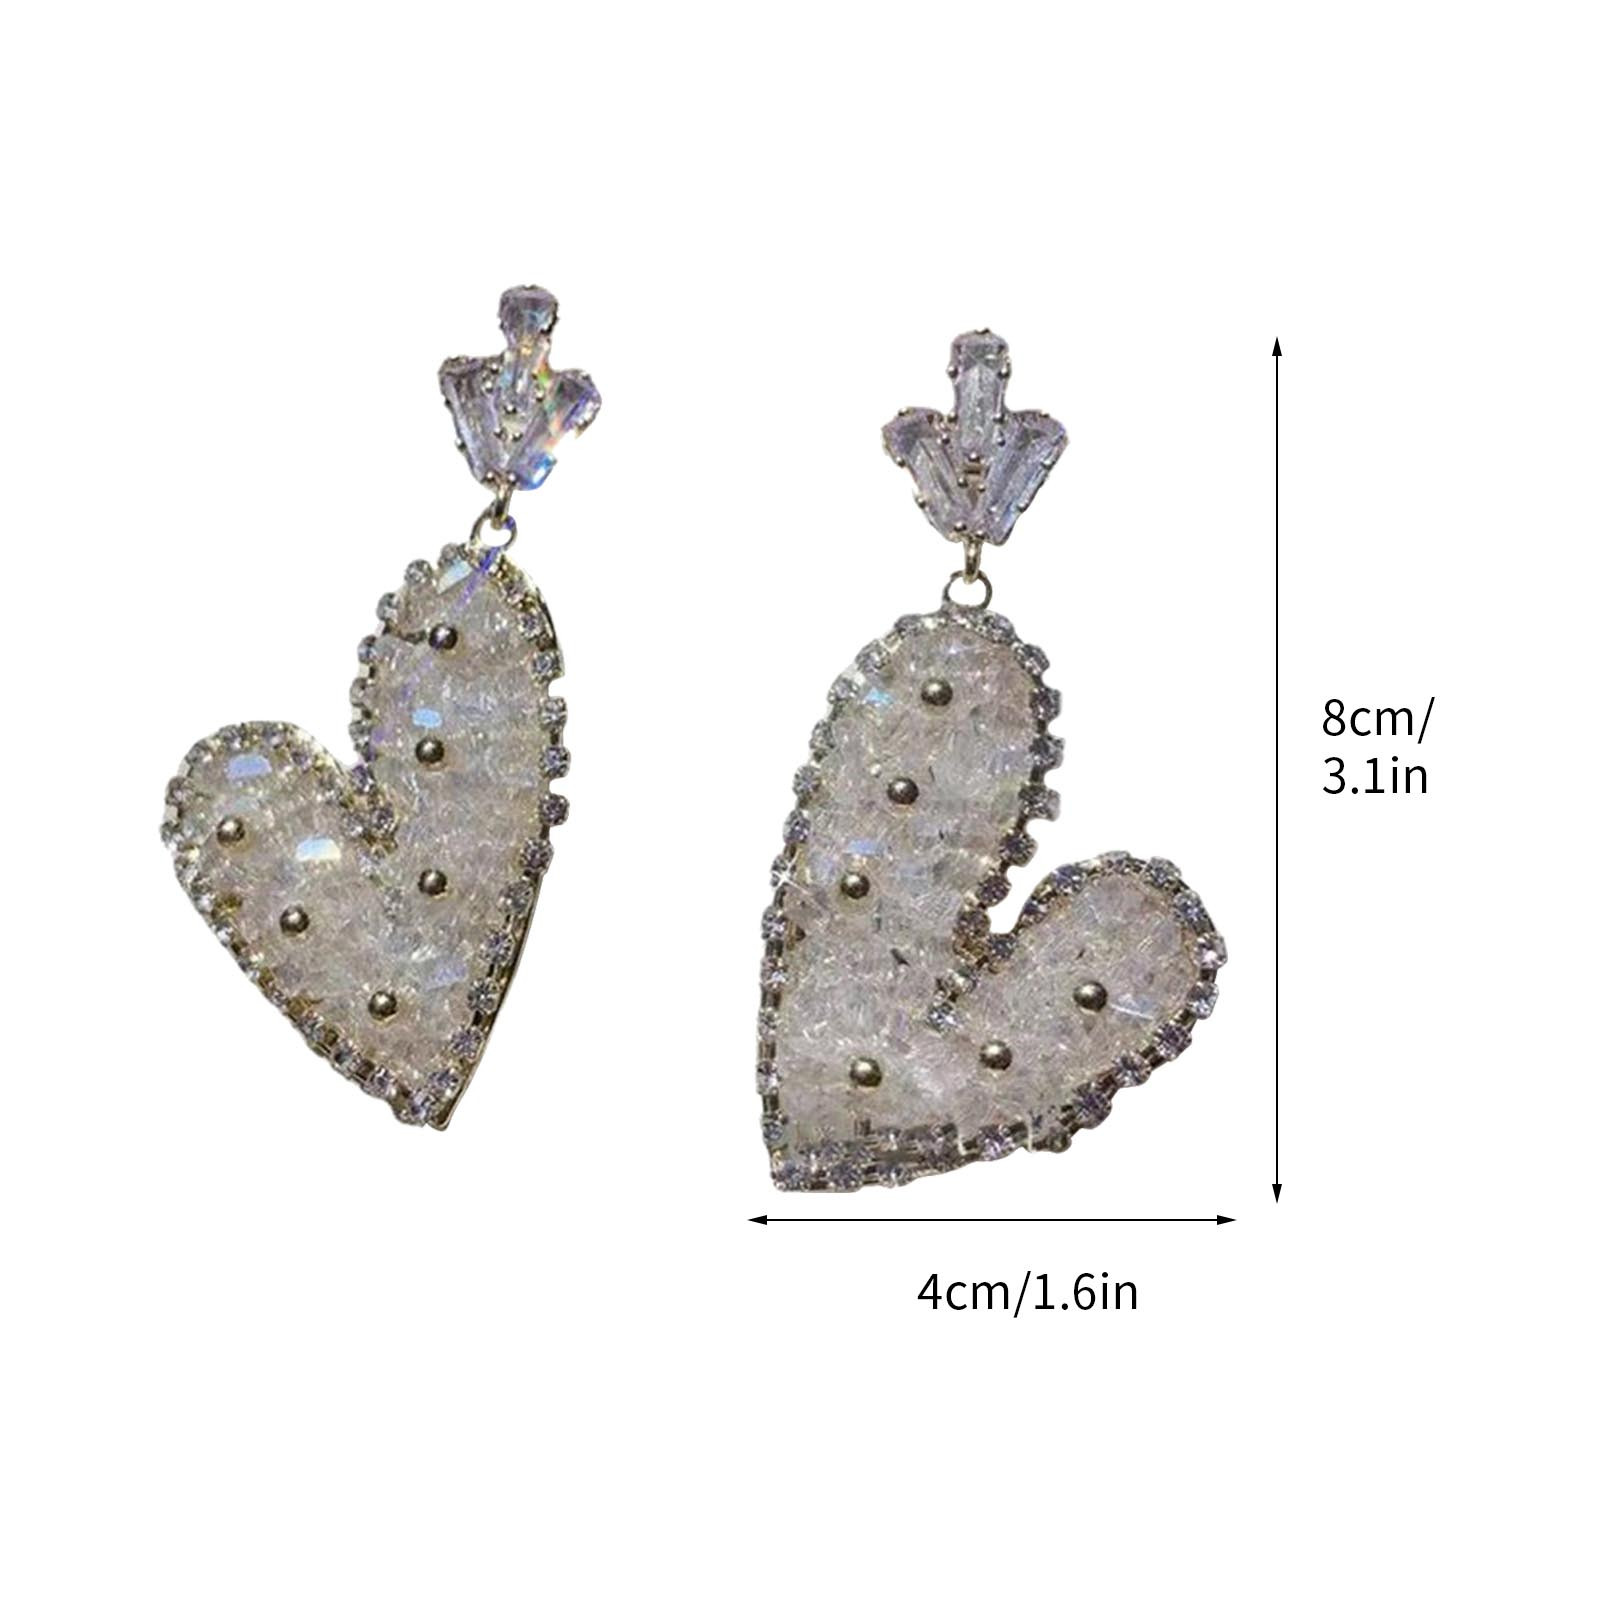 Kayannuo Gifts For Women Christmas Clearance Diamond Hollow Love Stud Earrings Temperament Inlaid Rhinestone Peach Heart Drop Earrings Christmas Gifts - image 3 of 8